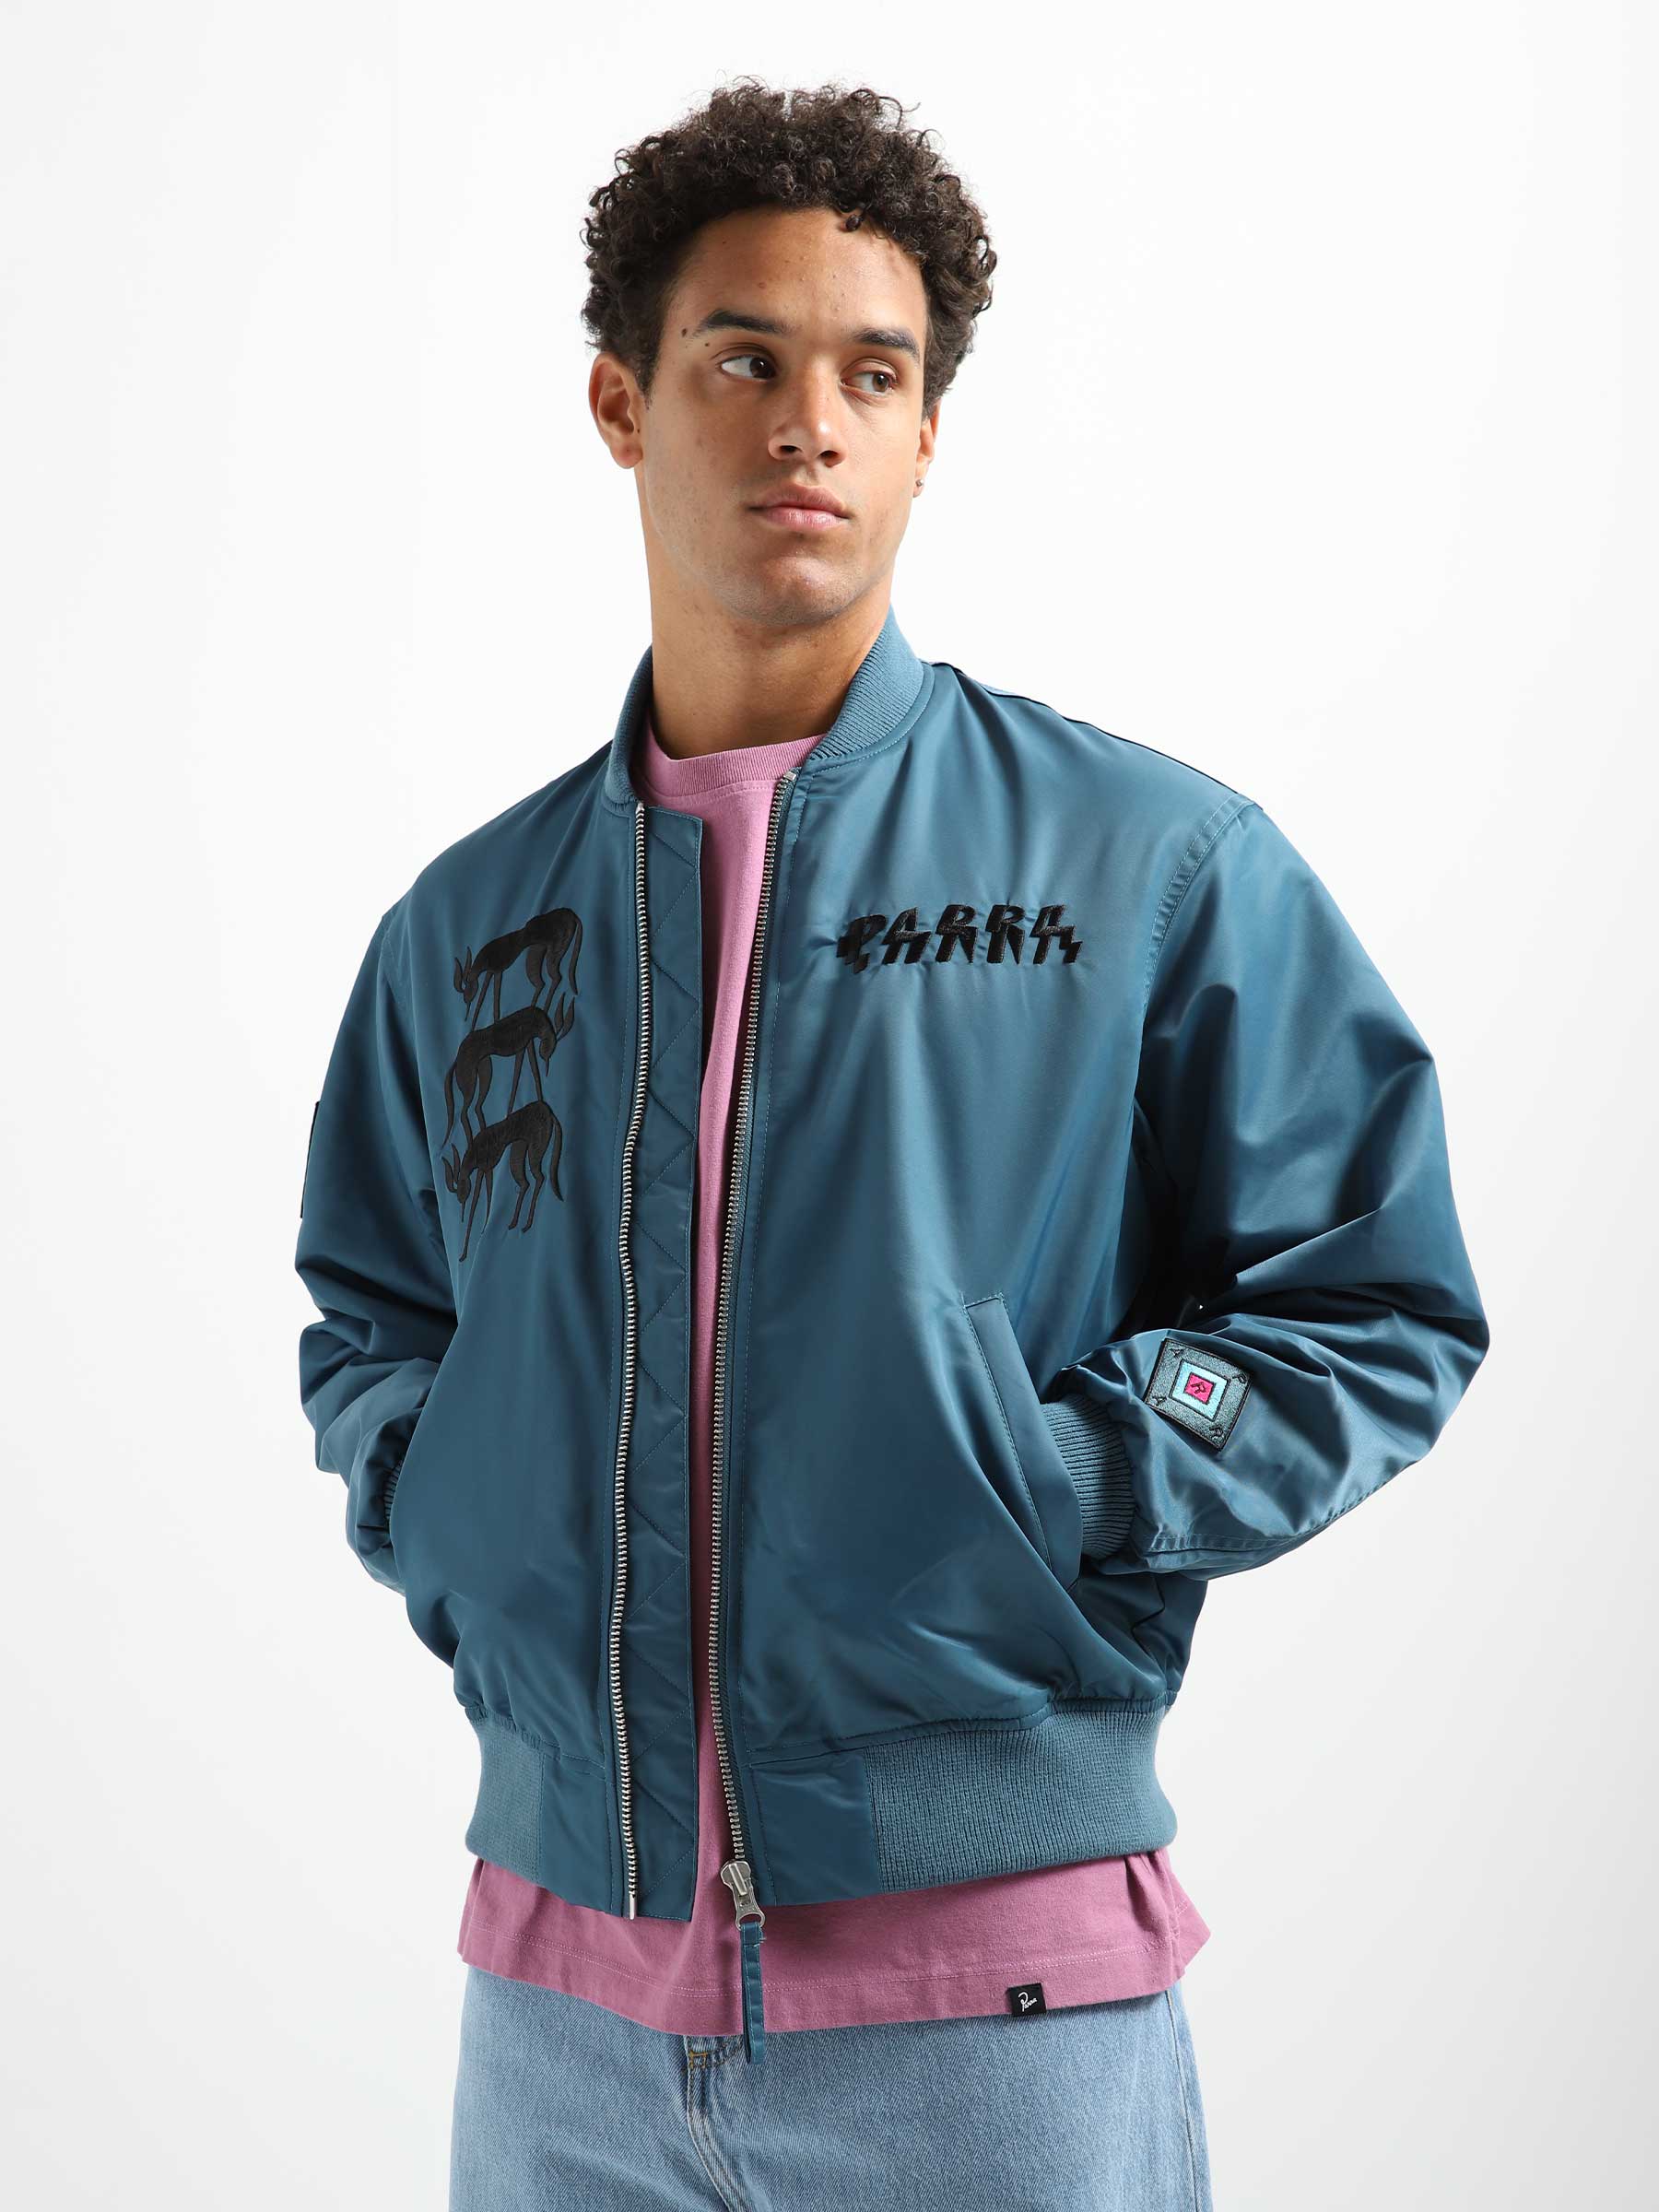 ByParra Stacked Pets Varsity Jacket Teal 